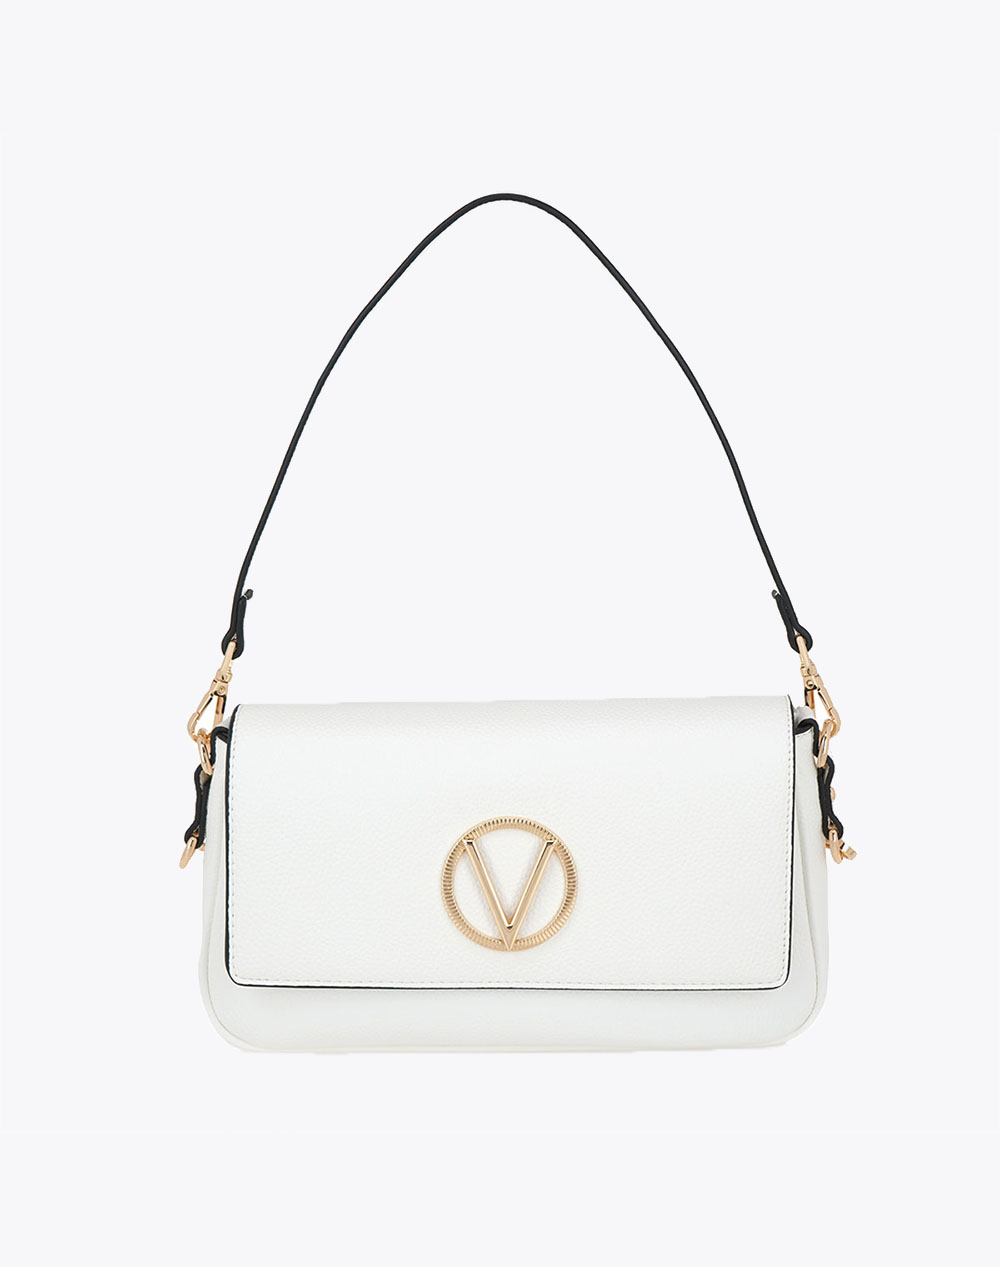 VALENTINO BAGS ΤΣΑΝΤΕΣ ΤΑΧΥΔΡΟΜΟΥ /CROSS BODY (Διαστάσεις: 18 x 11 x 8 εκ.) S61680529651-651 White